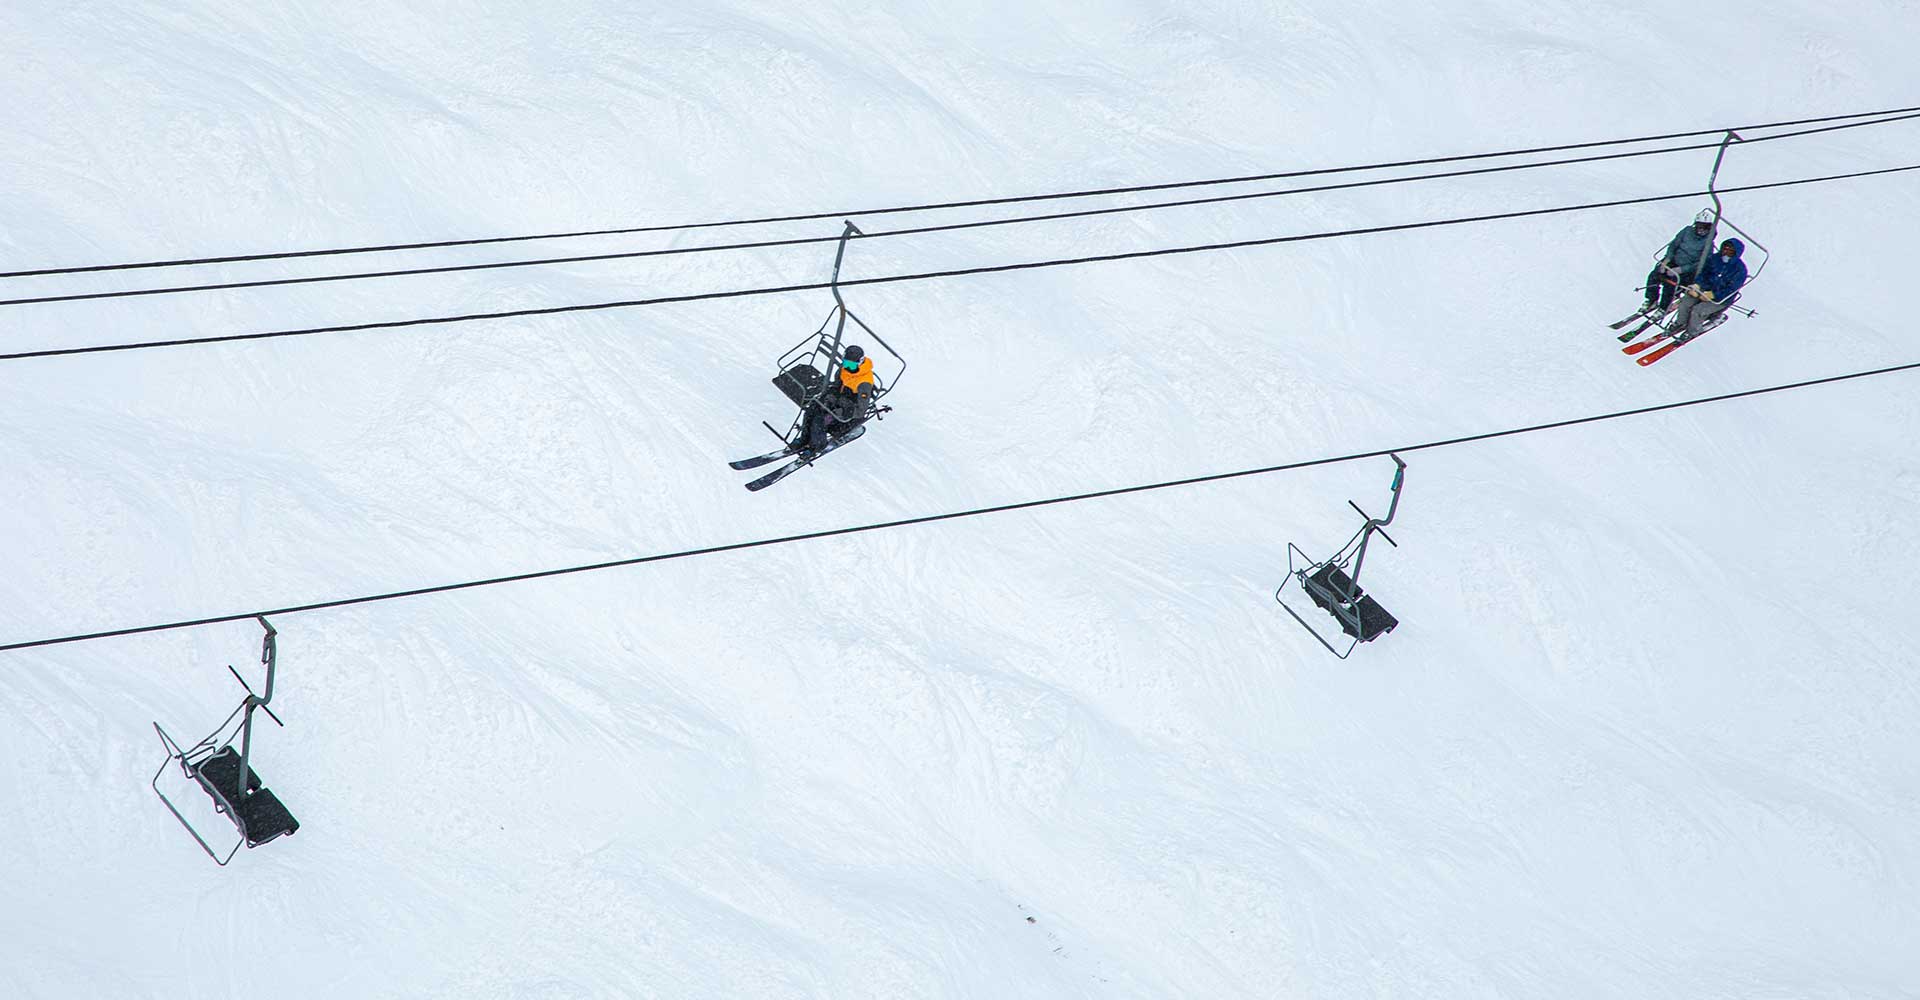 An aerial photo of a double chairlift at Aspen Snowmass